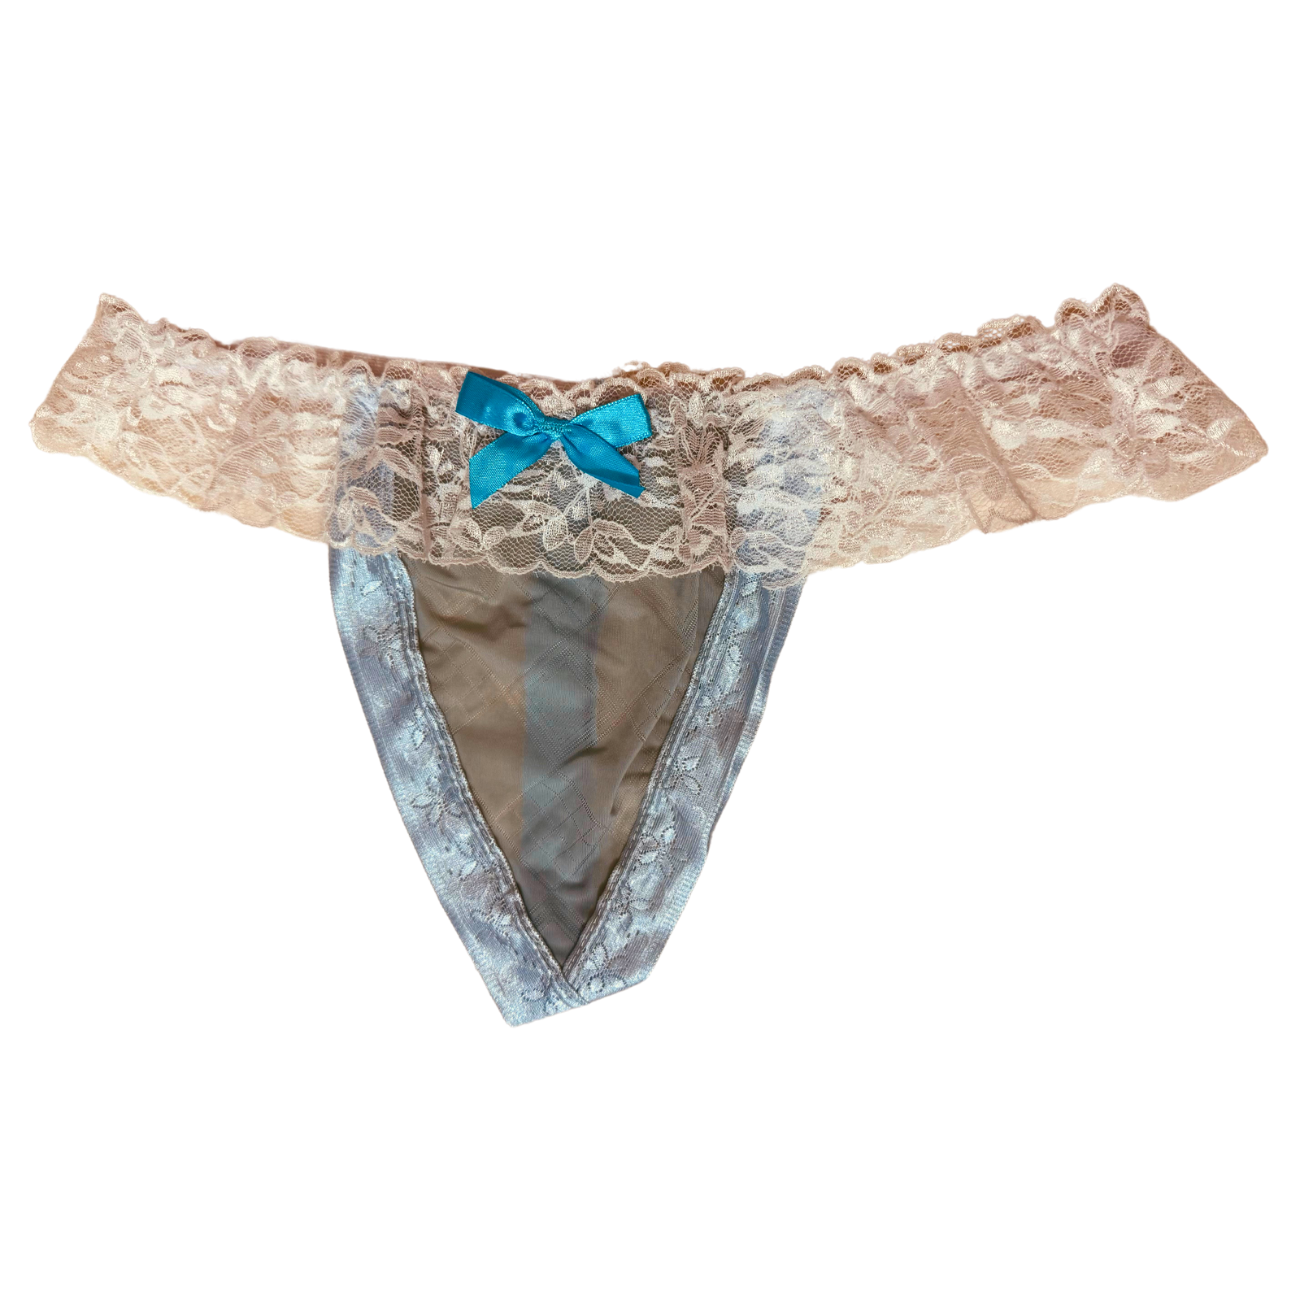 Crimson Charm Lace-Edged Panty - The Whispers Wear